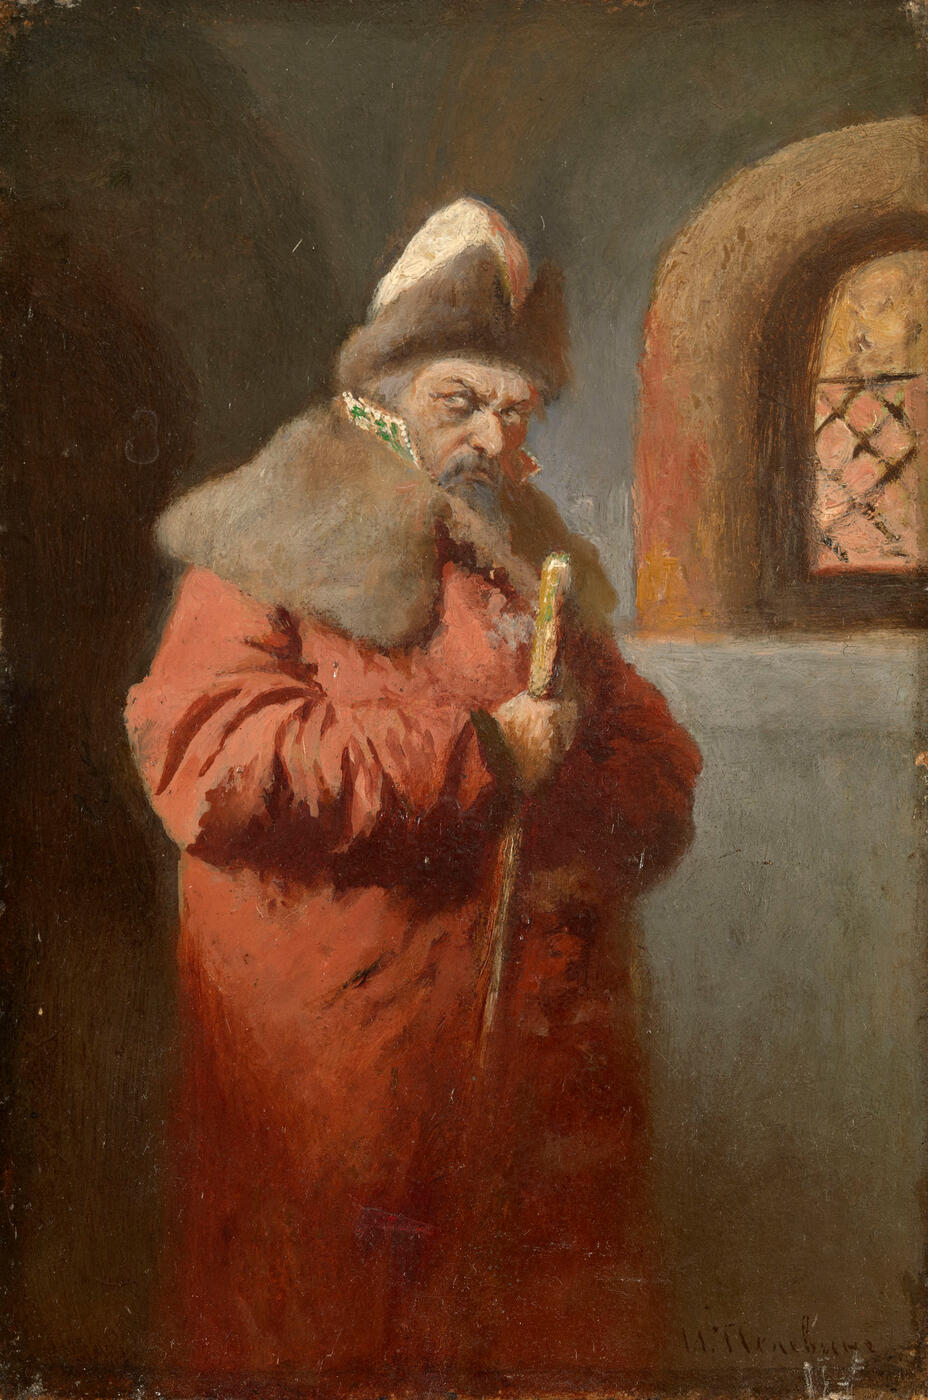 Study for the Painting "Ivan the Terrible"